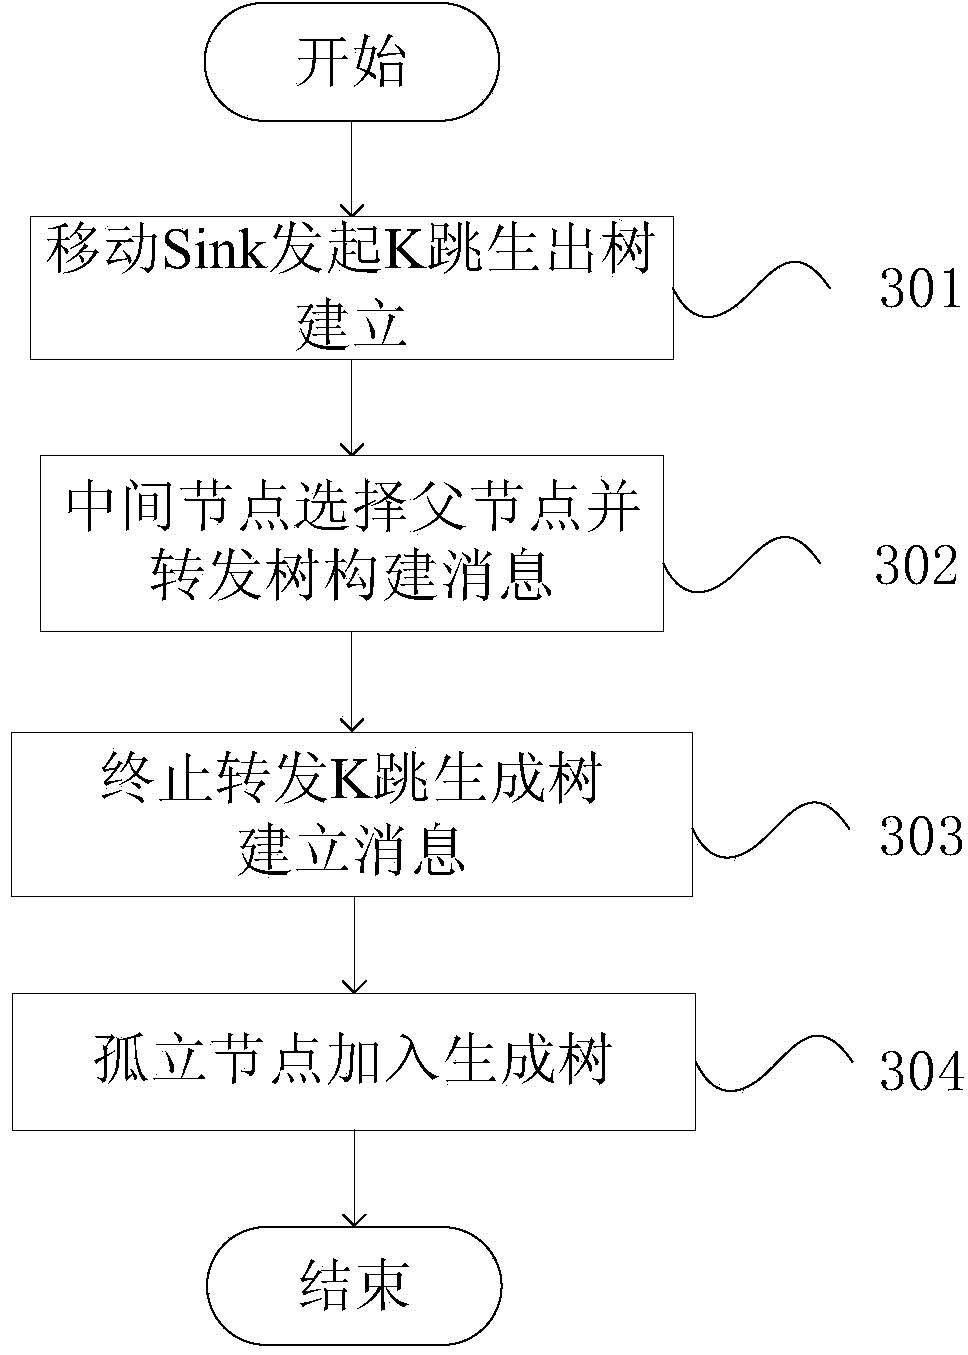 Mobile Sink data collection method applied to wireless sensor network and used for node internal-memory resource sharing